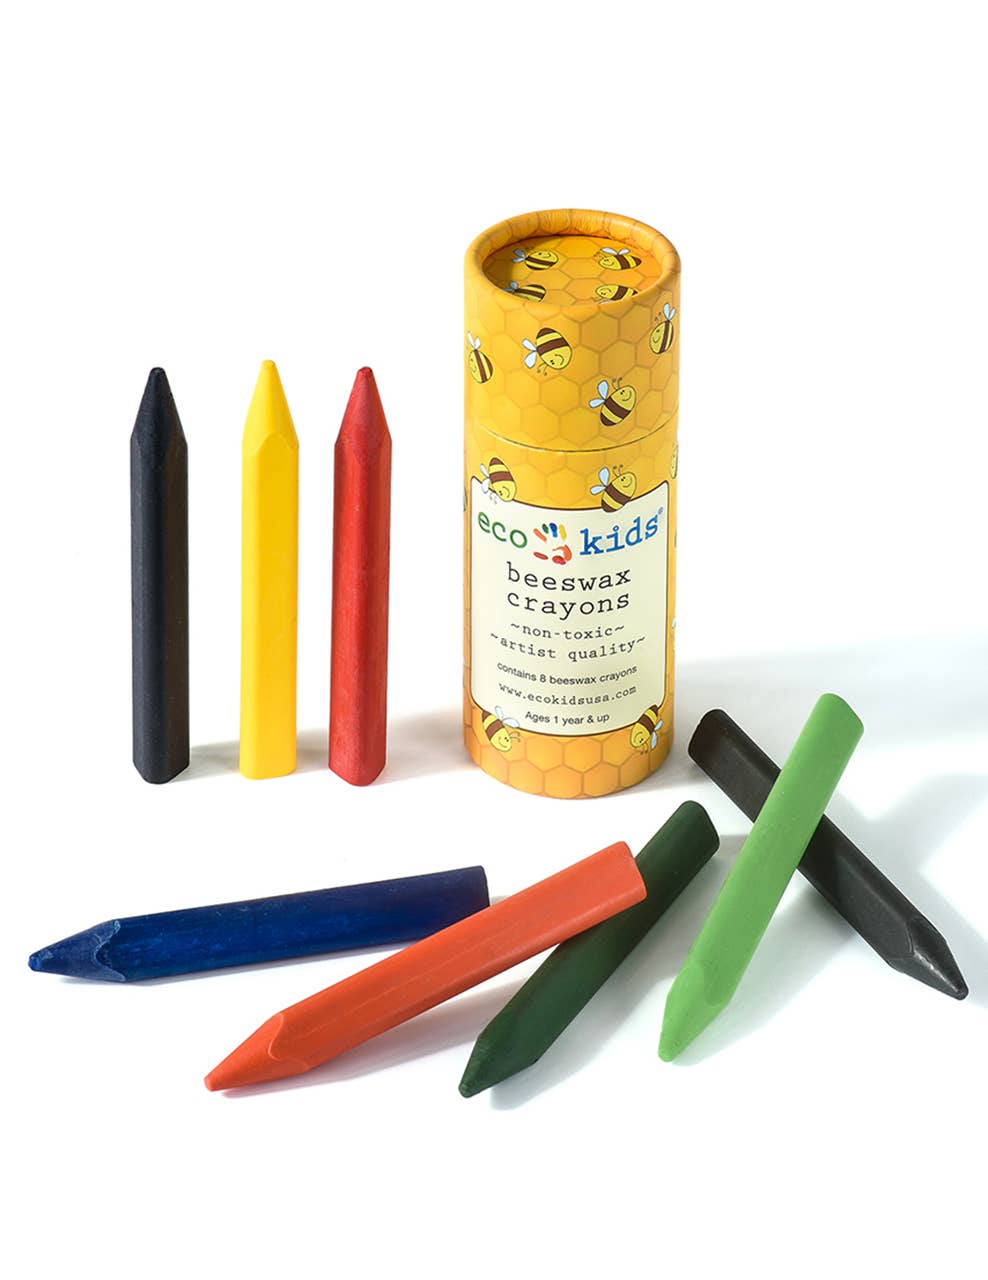 beeswax crayons - triangle - case